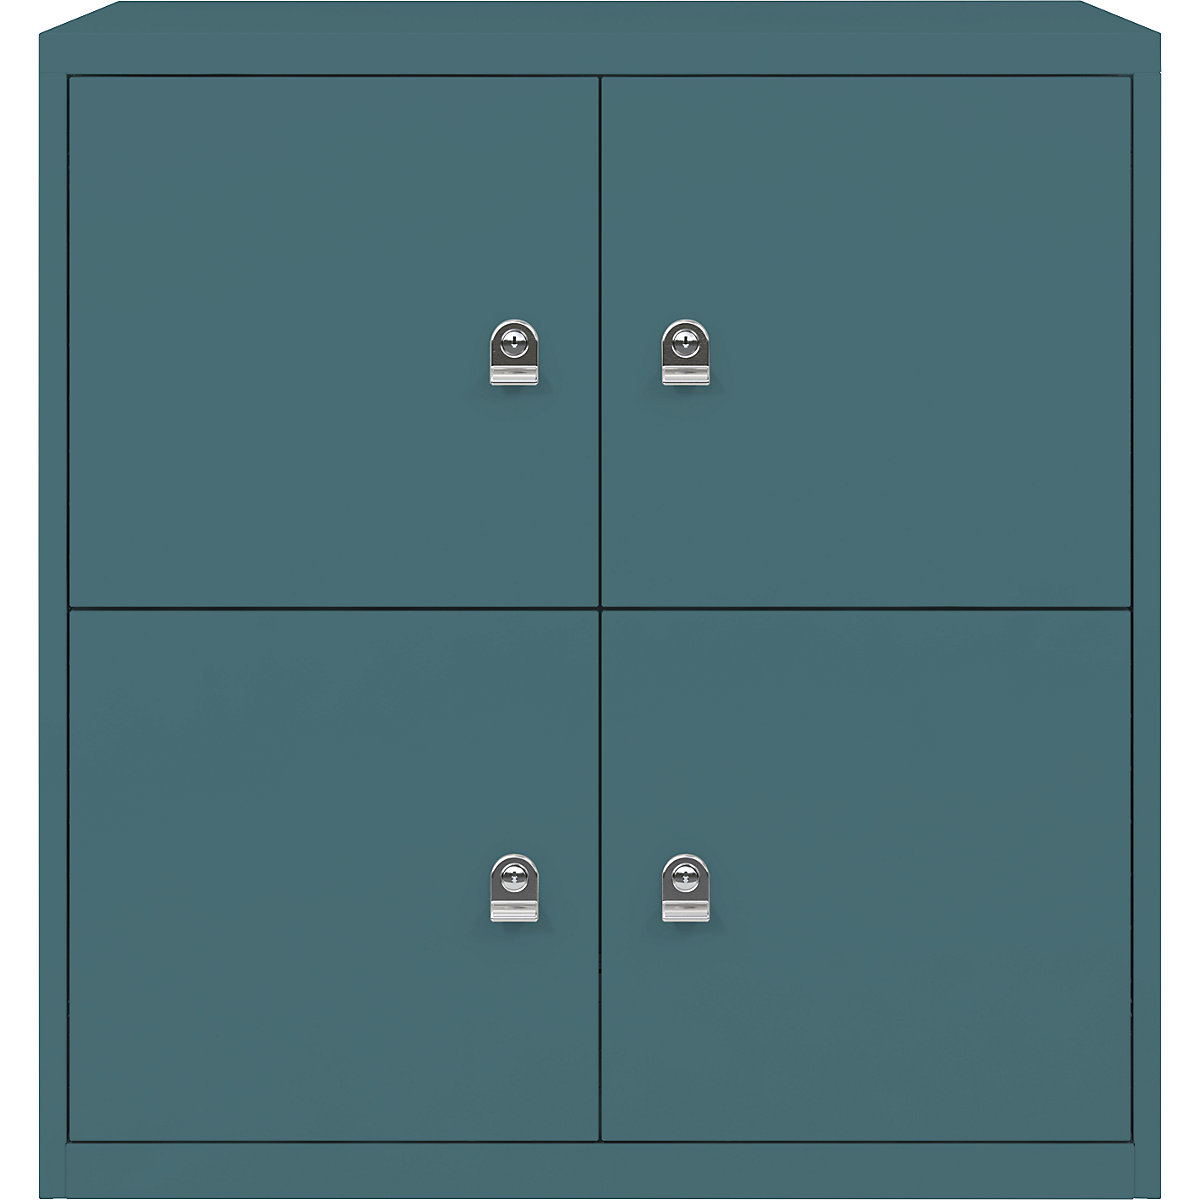 BISLEY – LateralFile™ lodge, with 4 lockable compartments, height 375 mm each, doulton